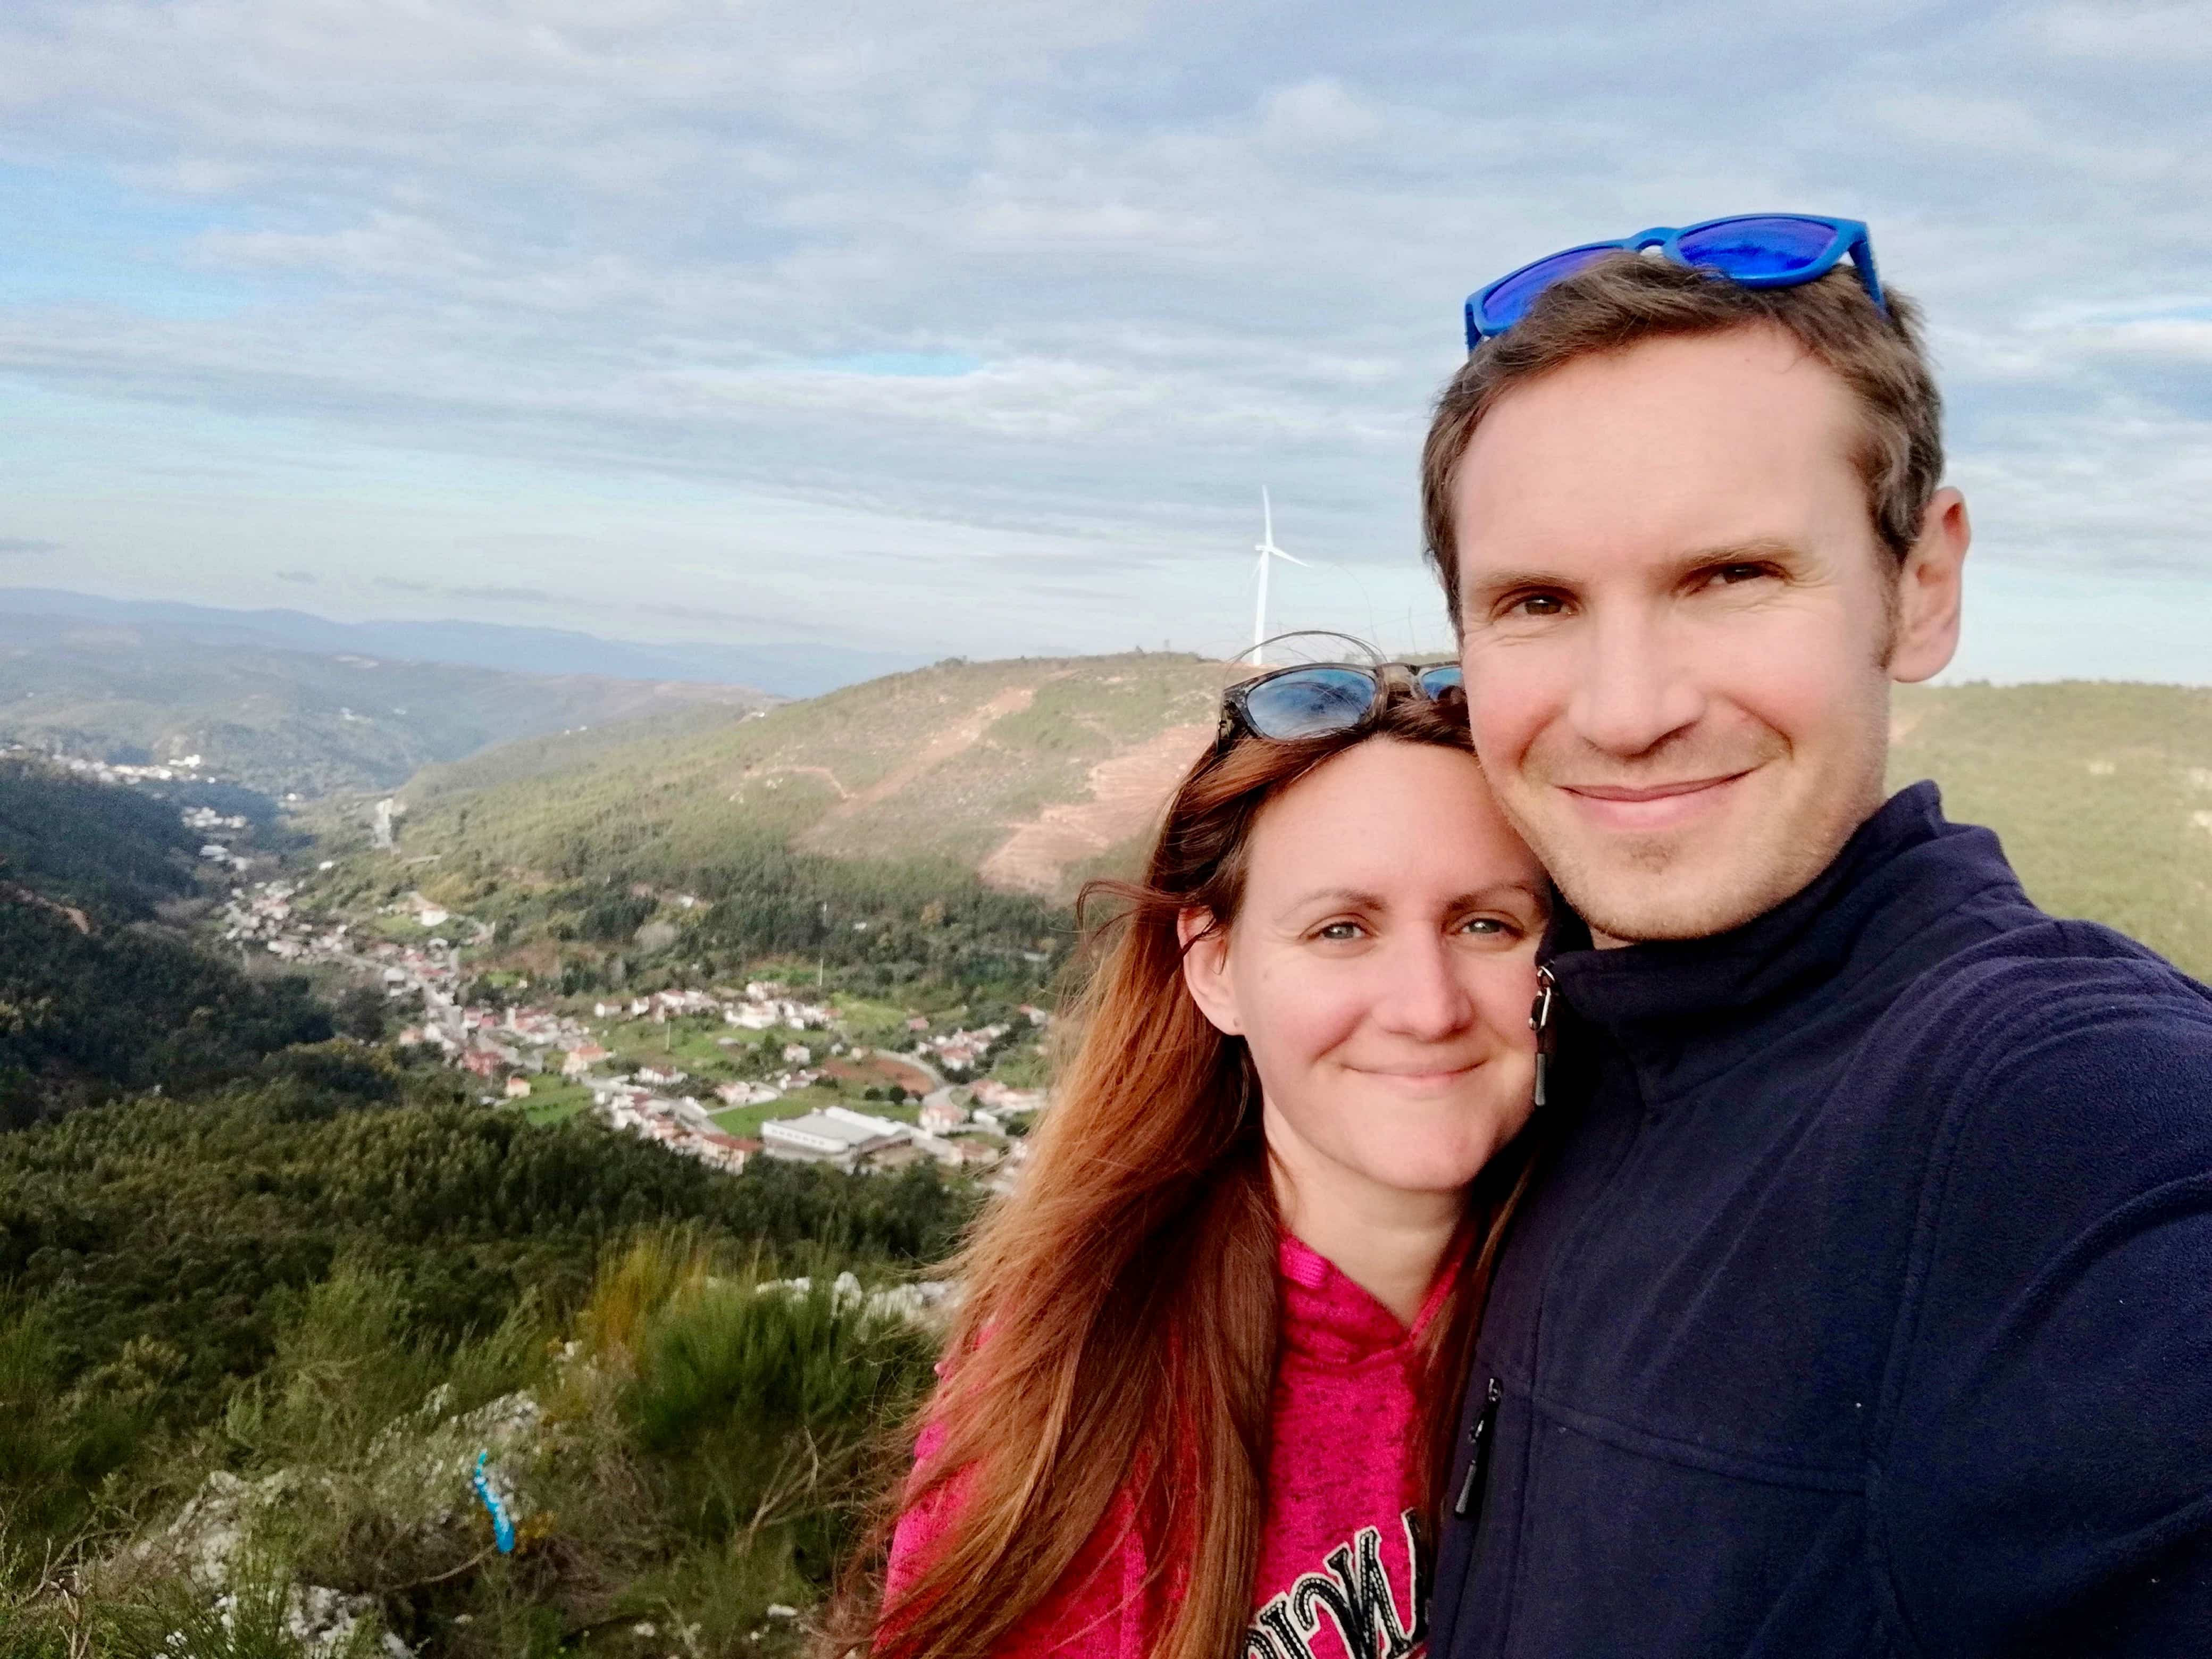 Us on a hilltop overlooking Central Portugal